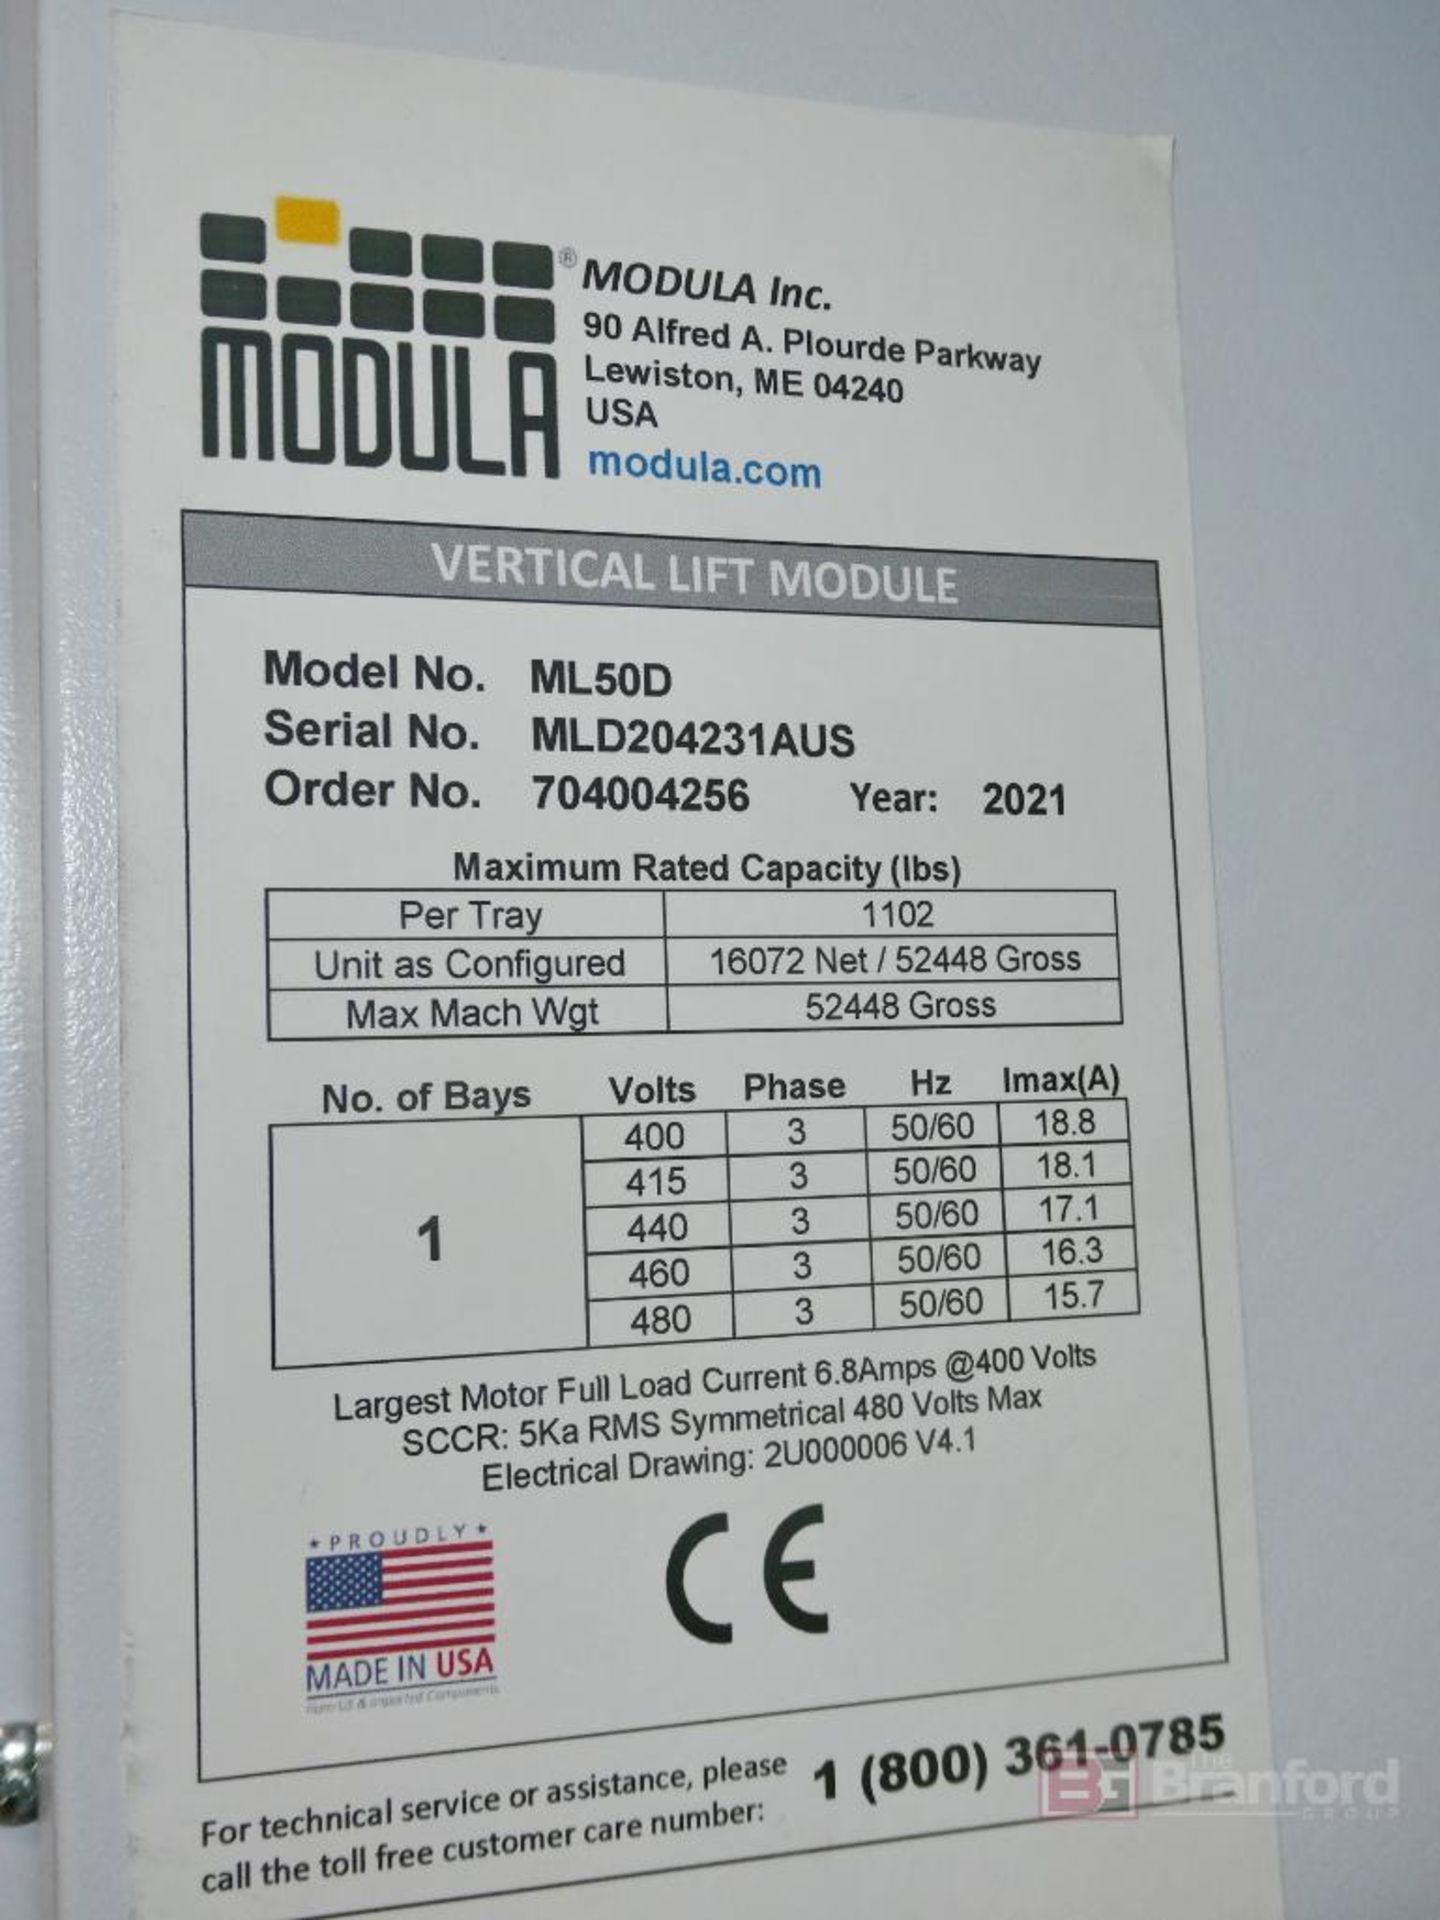 2021 Modula Lift Model ML50D, Automated Vertical Carousel Storage System - Image 10 of 10